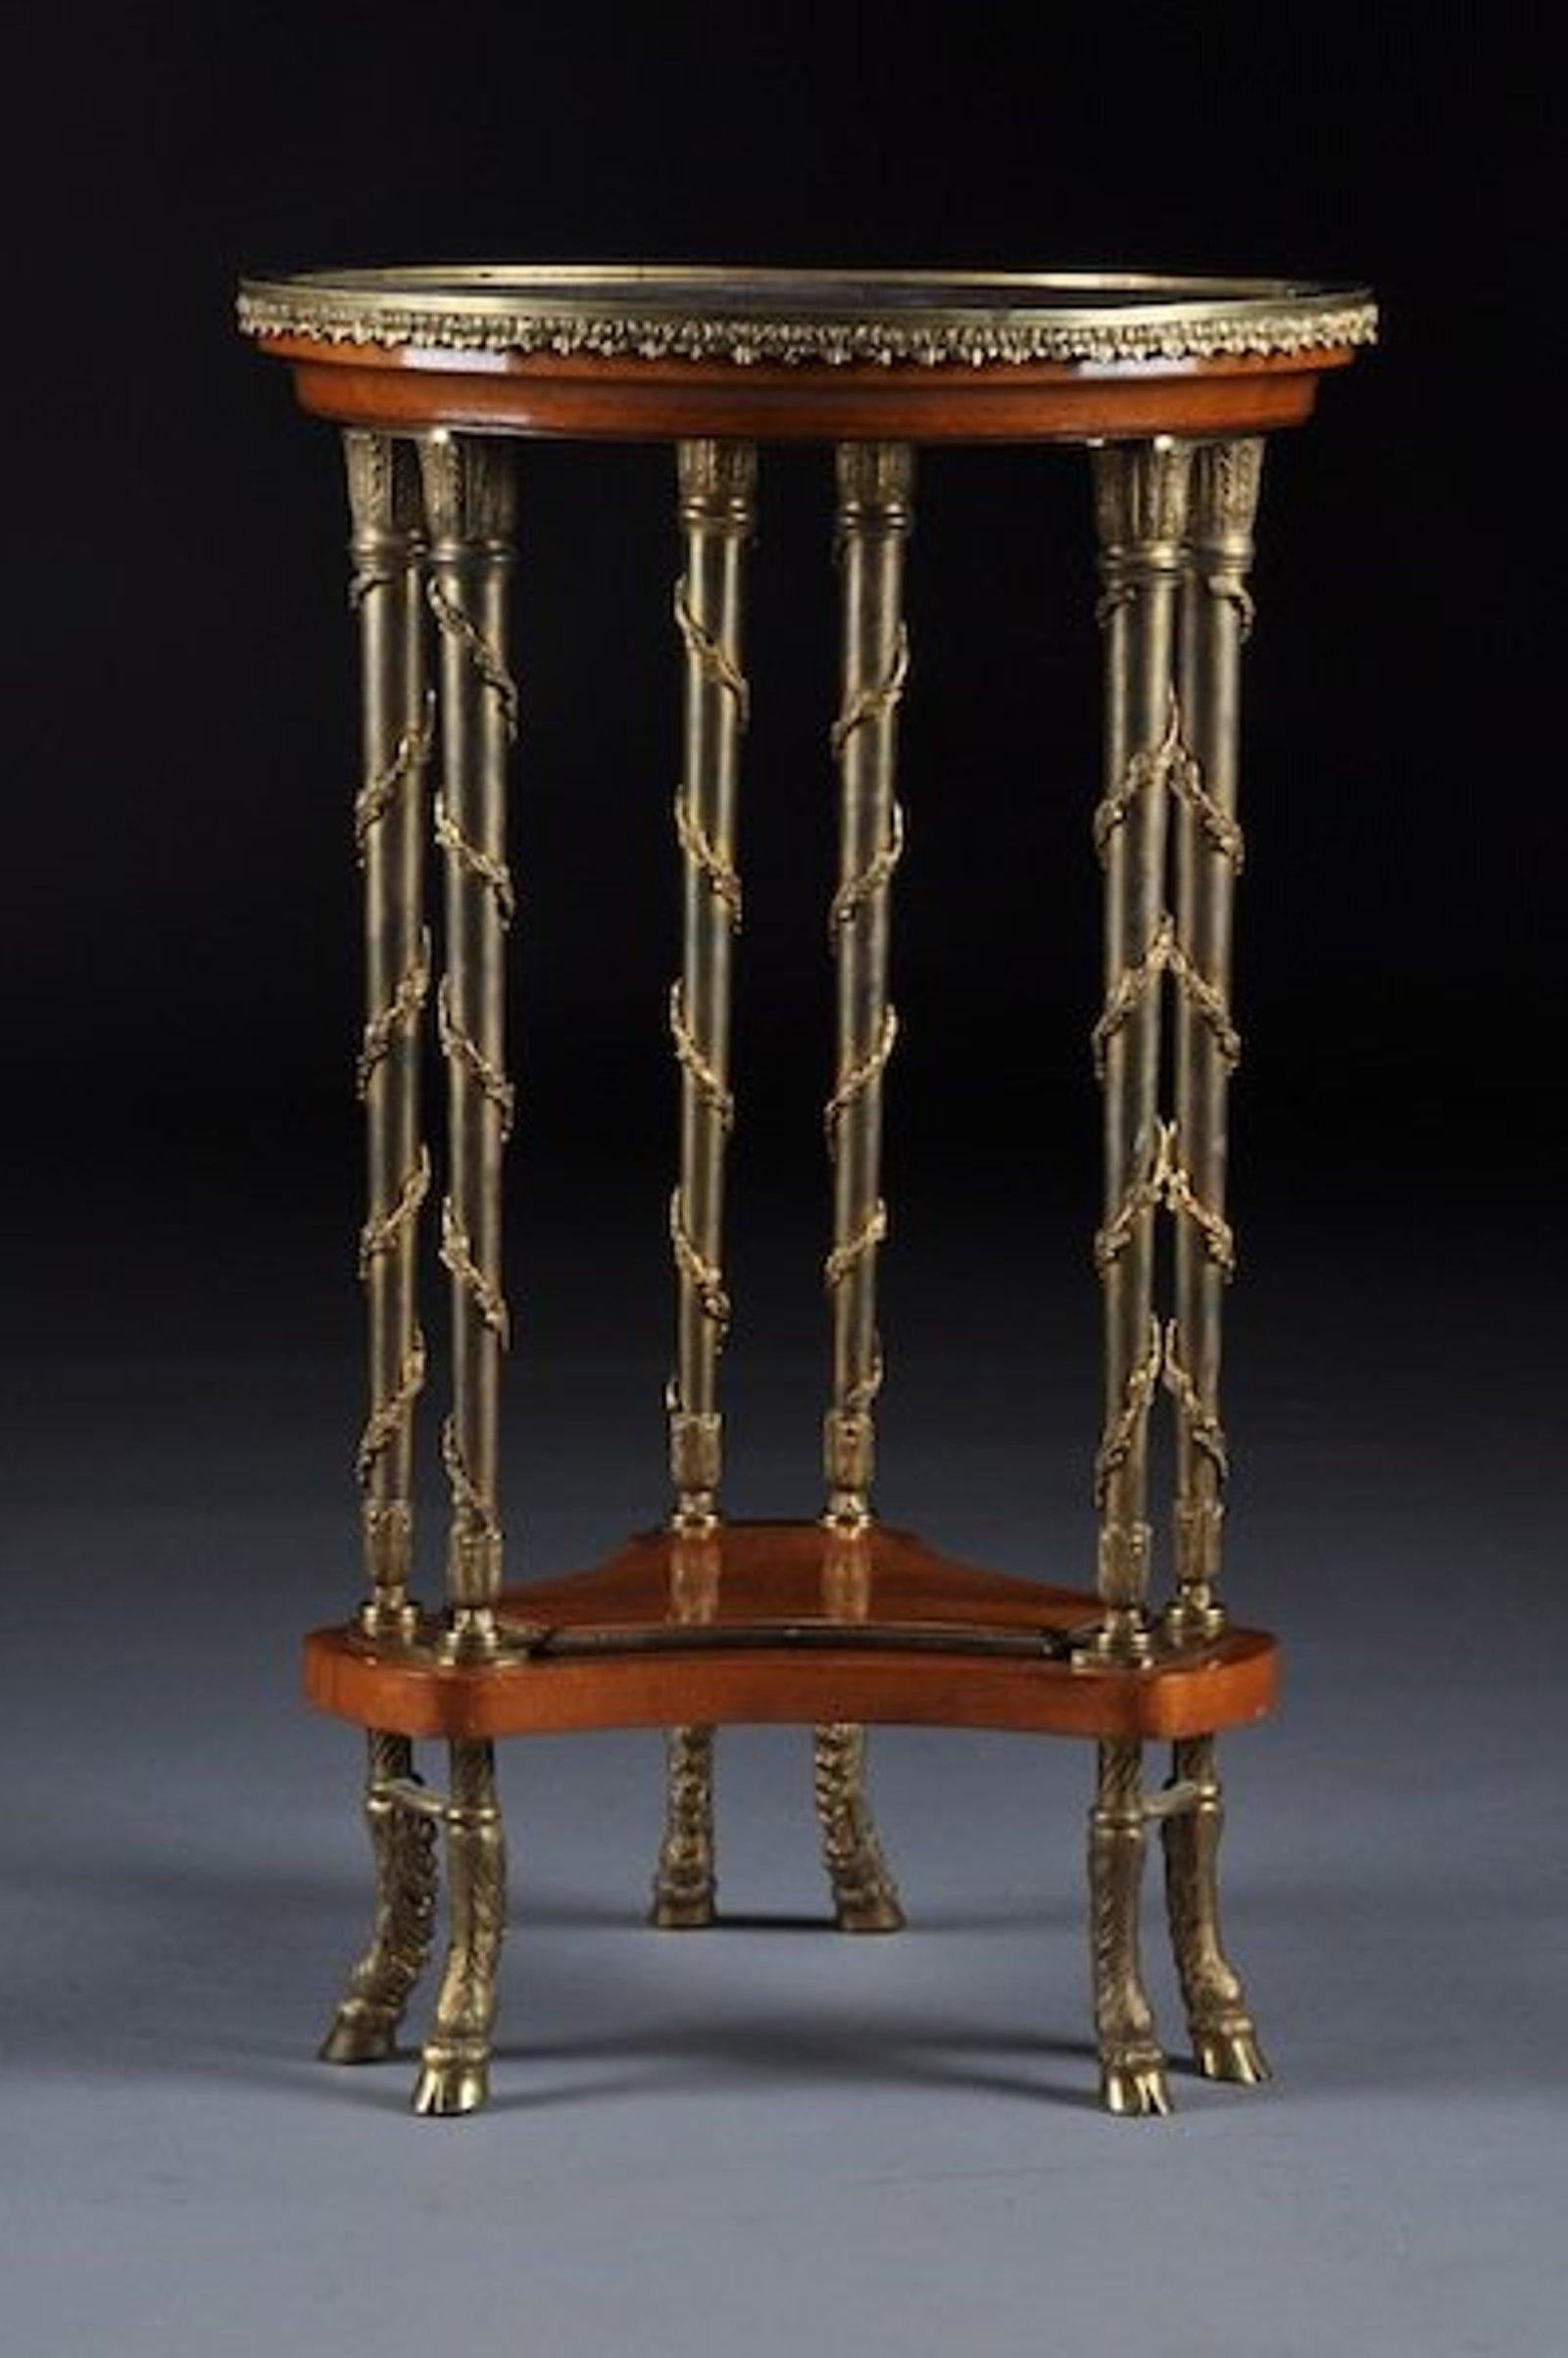 19th Century Louis XVI Style Gilt Bronze Mounted Mahagony Marquetry Side Table For Sale 1